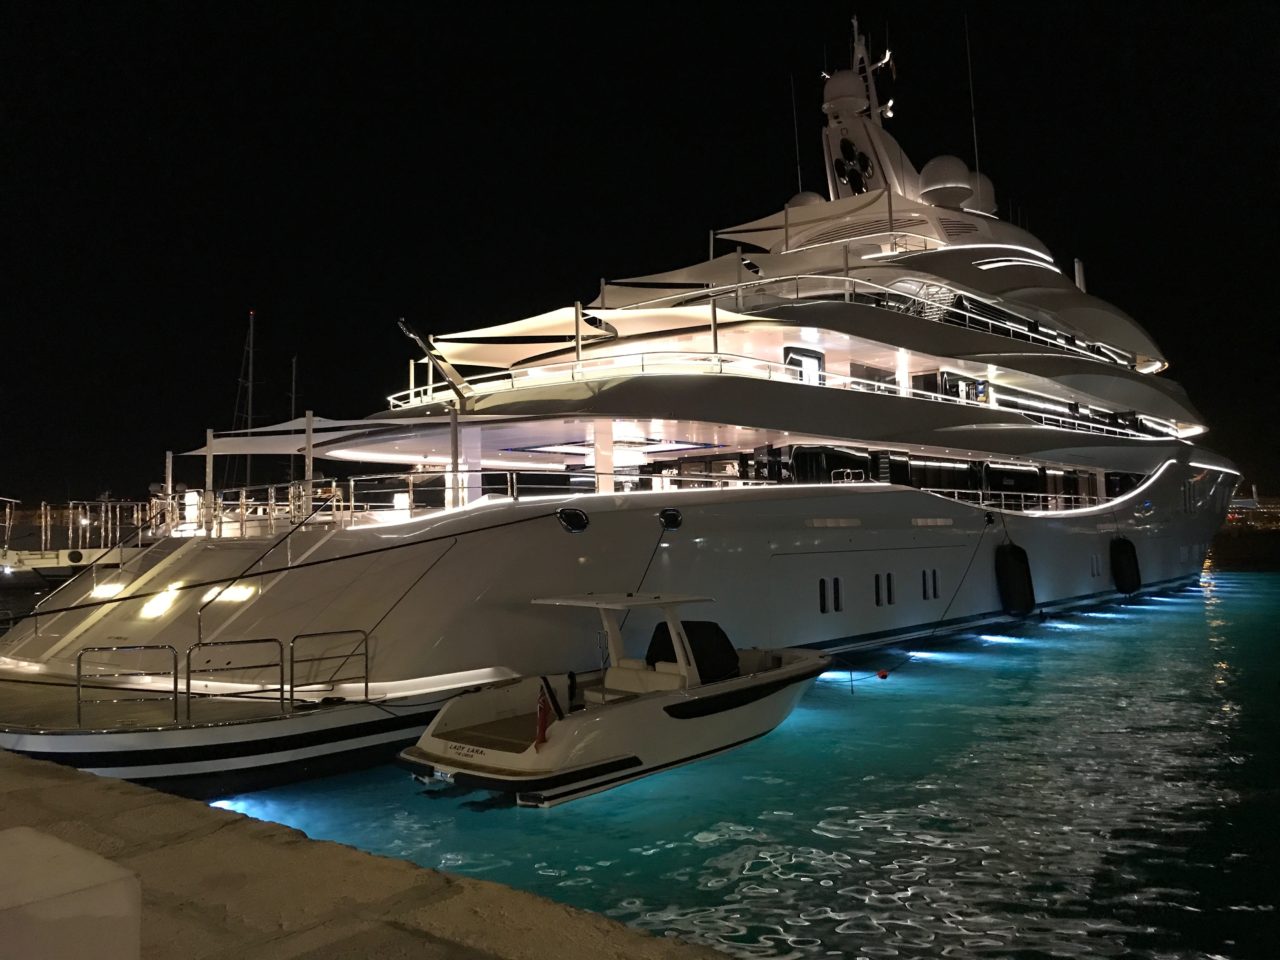 Luxury Yacht At The Dock In Ibiza City At Night